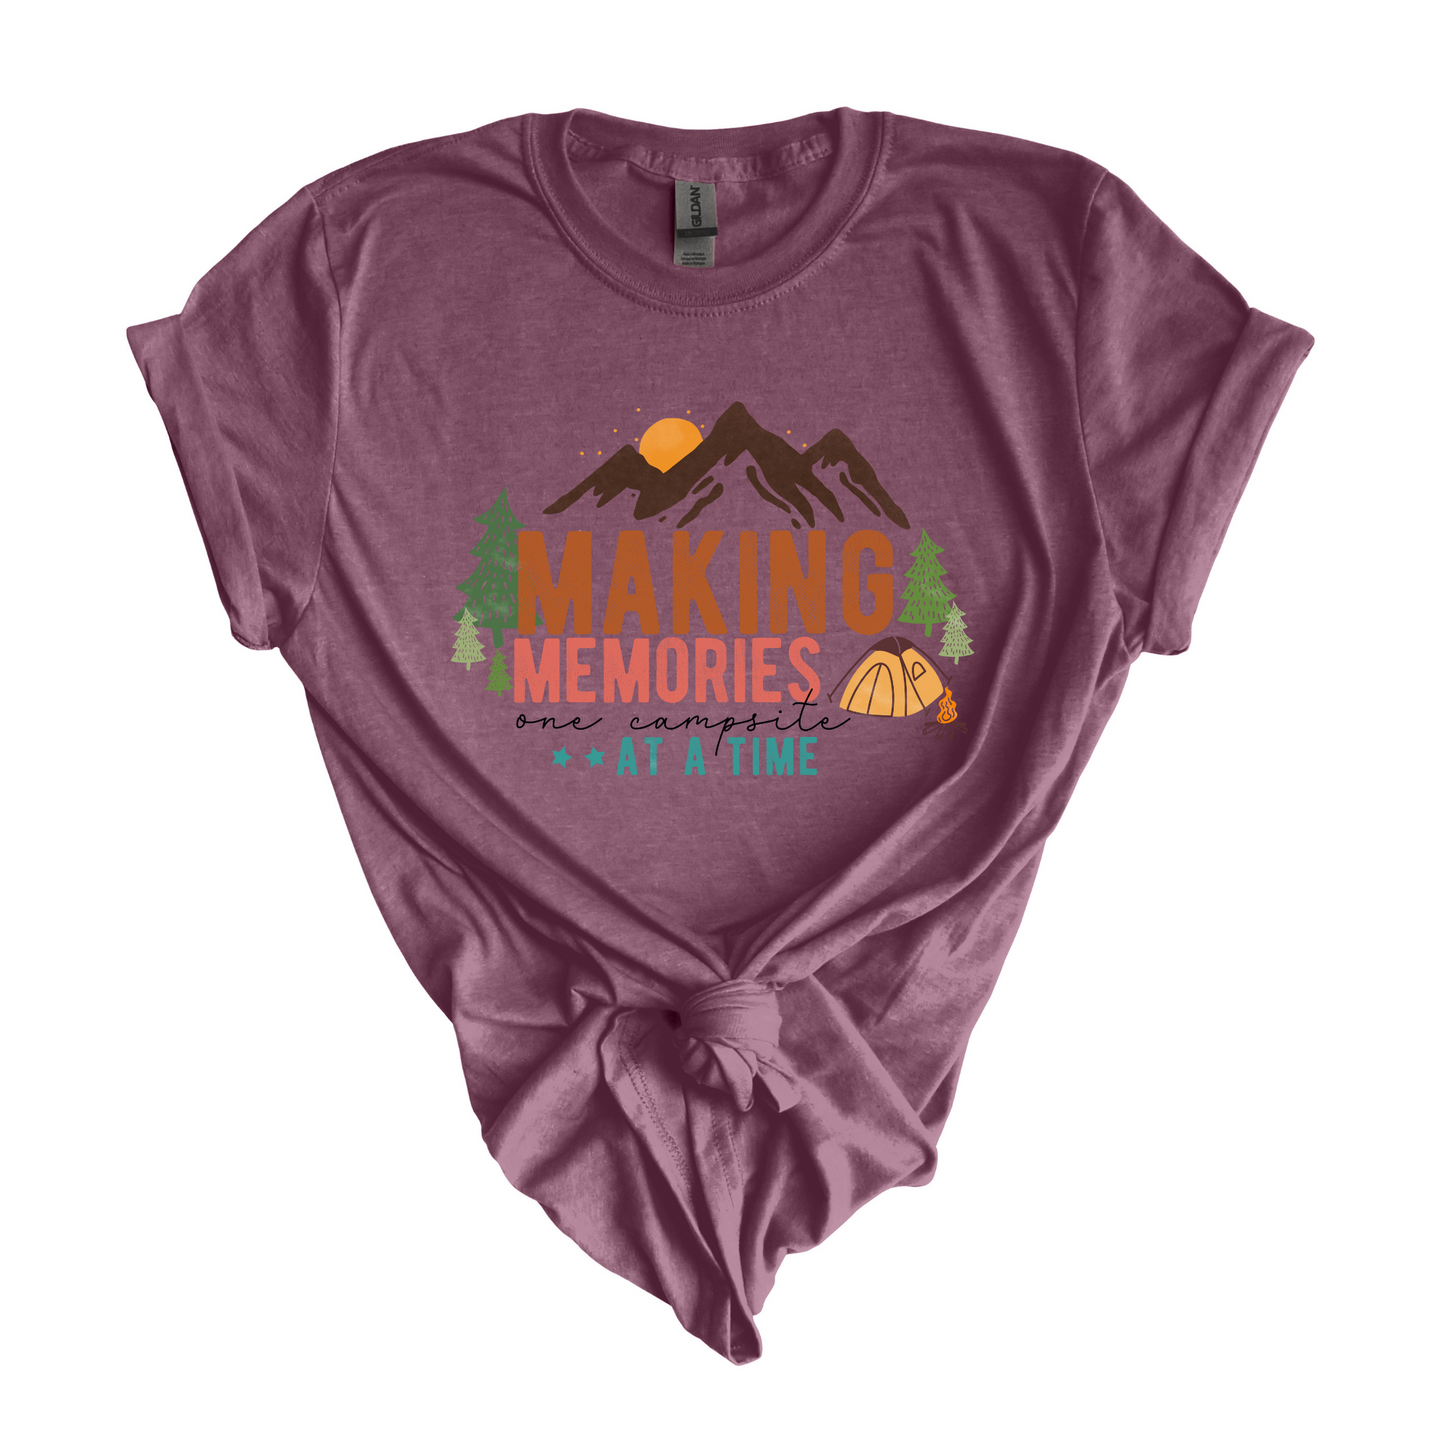 Making Memories One Campsite At A Time Tshirt